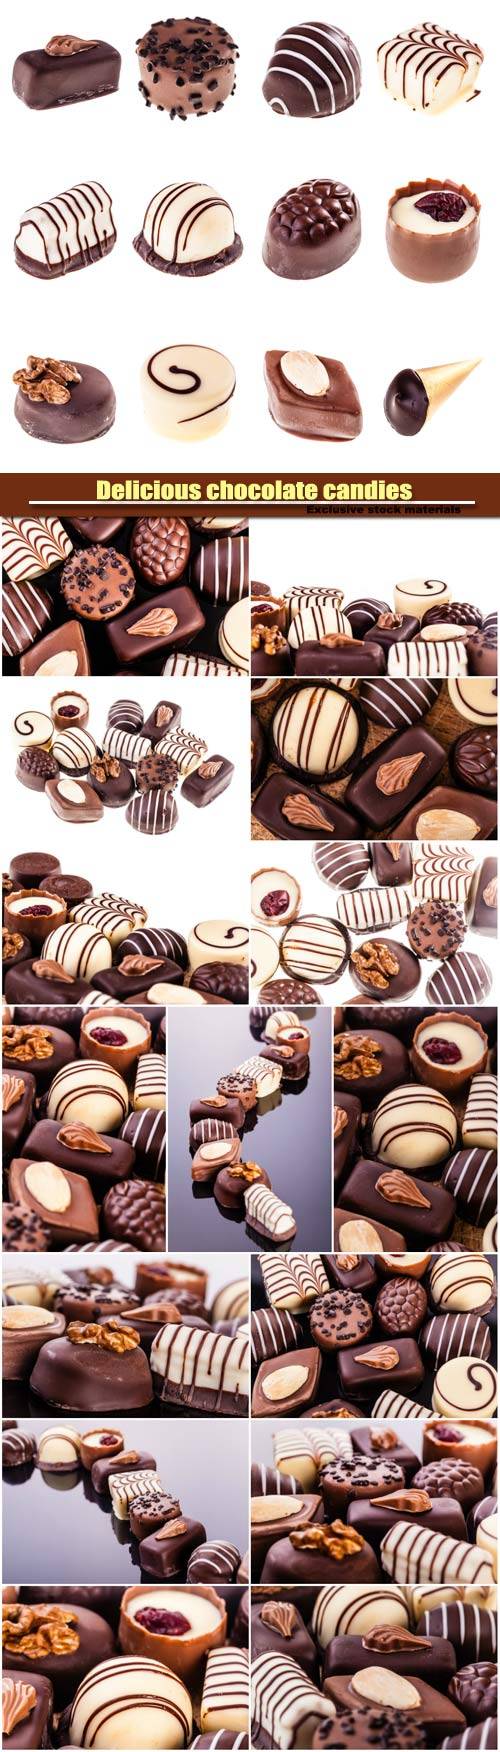 Delicious chocolate candies